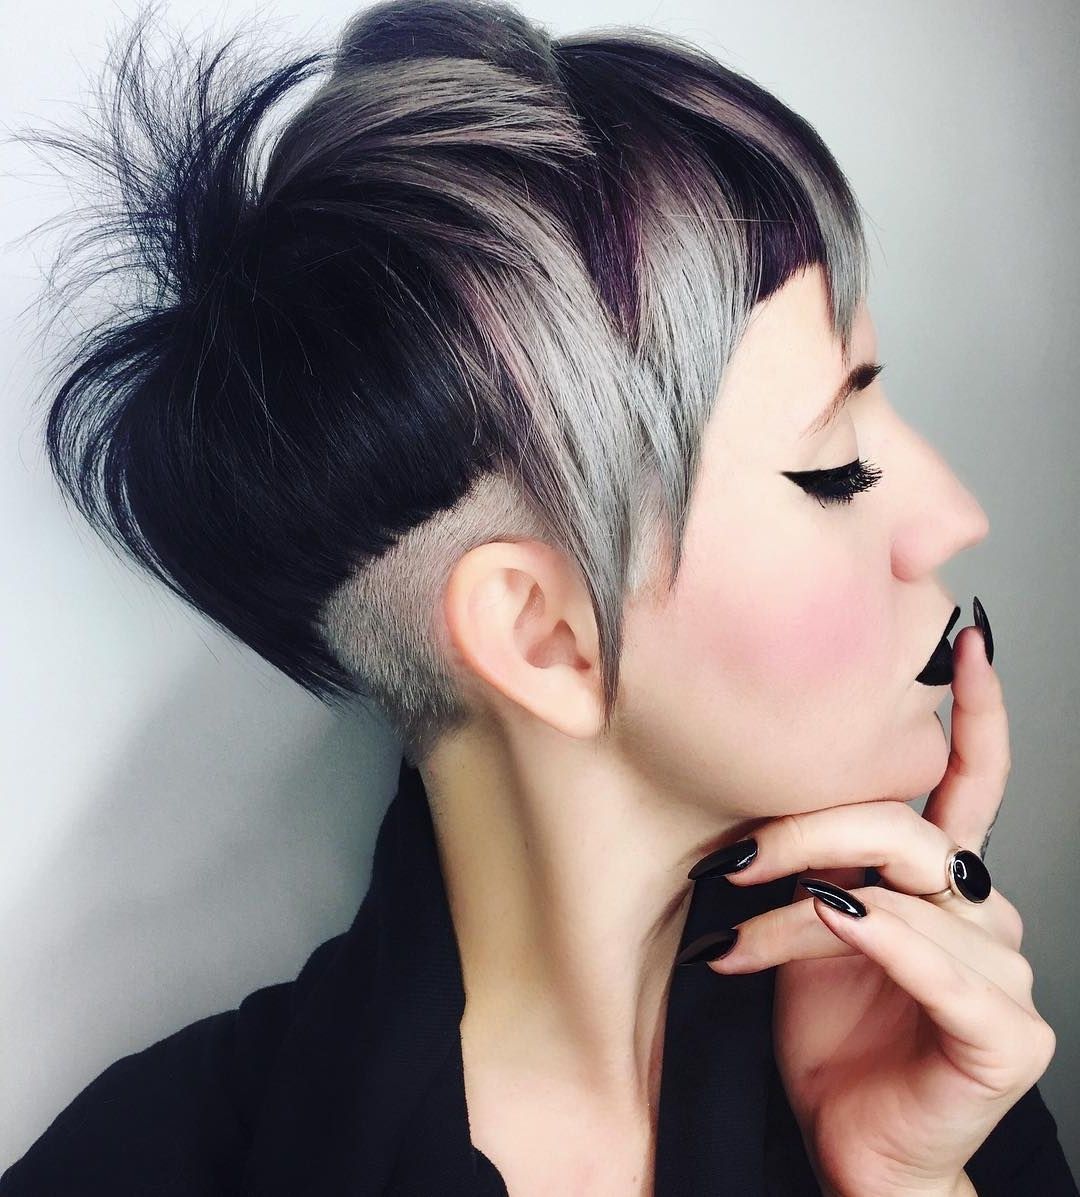 10 Latest Pixie Haircut For Women – 2018 Short Haircut Ideas With For Most Up To Date Razor Pixie Hairstyles (View 3 of 15)